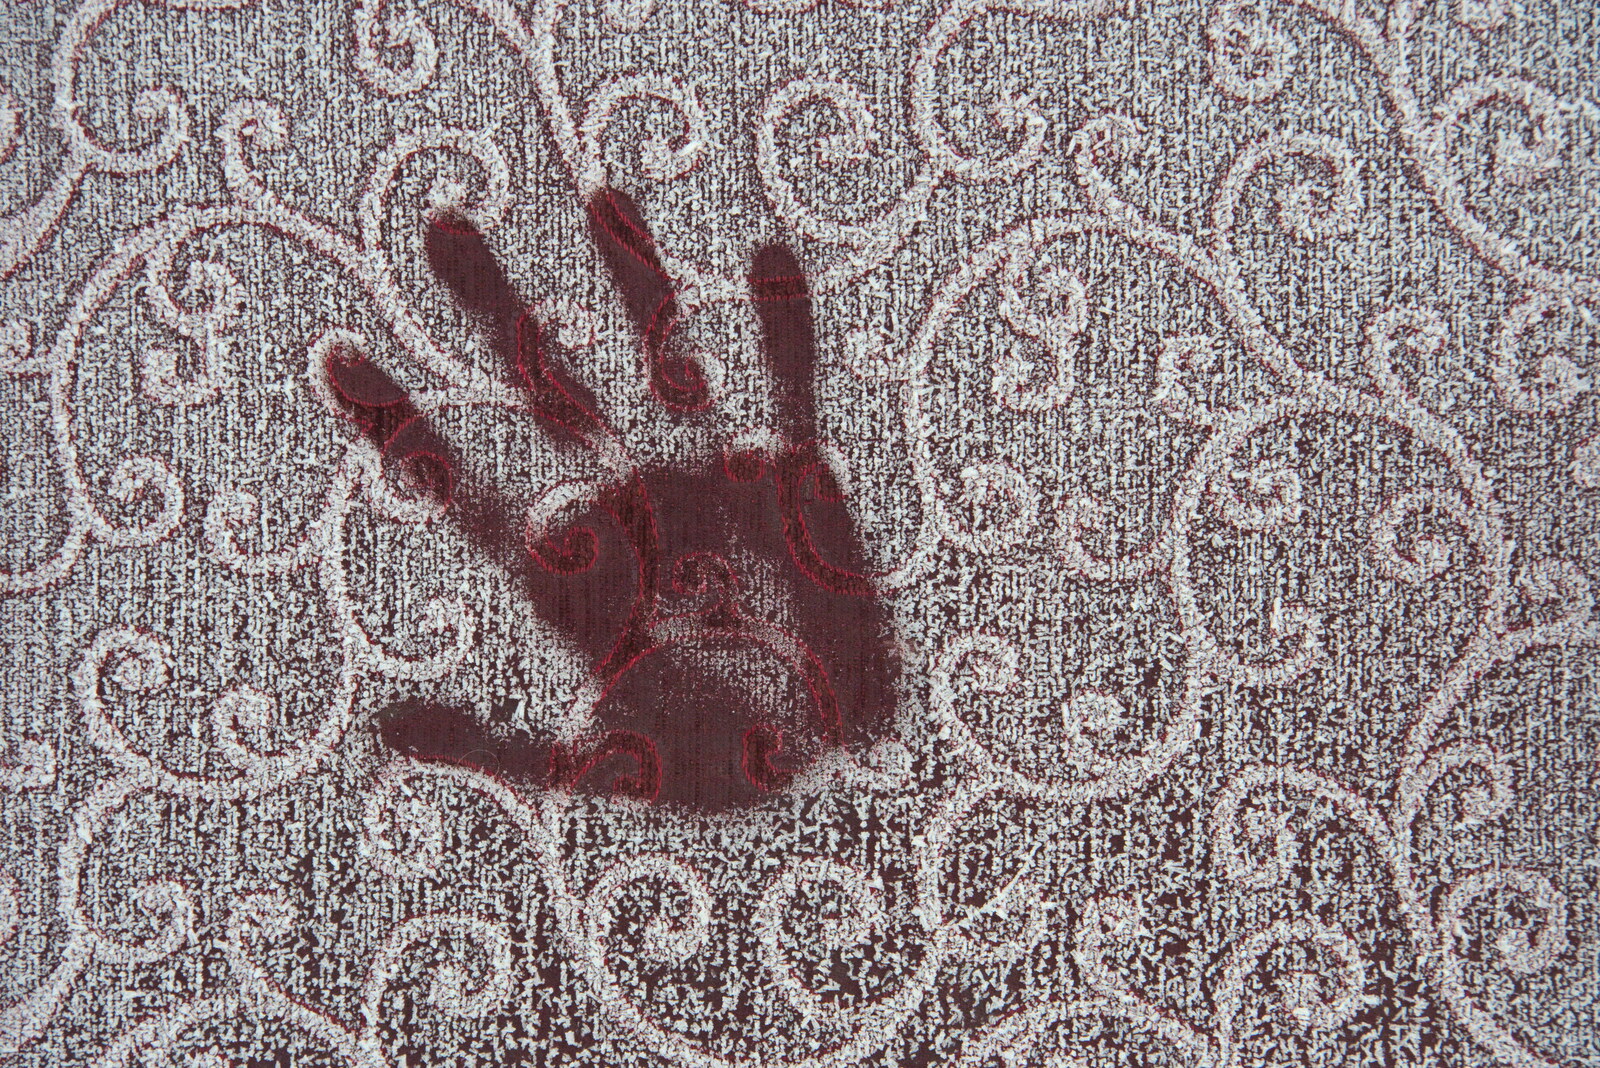 A boy leaves a handprint in the sofa frost from Fun With Ice in Lockdown, Brome, Suffolk - 10th January 2021